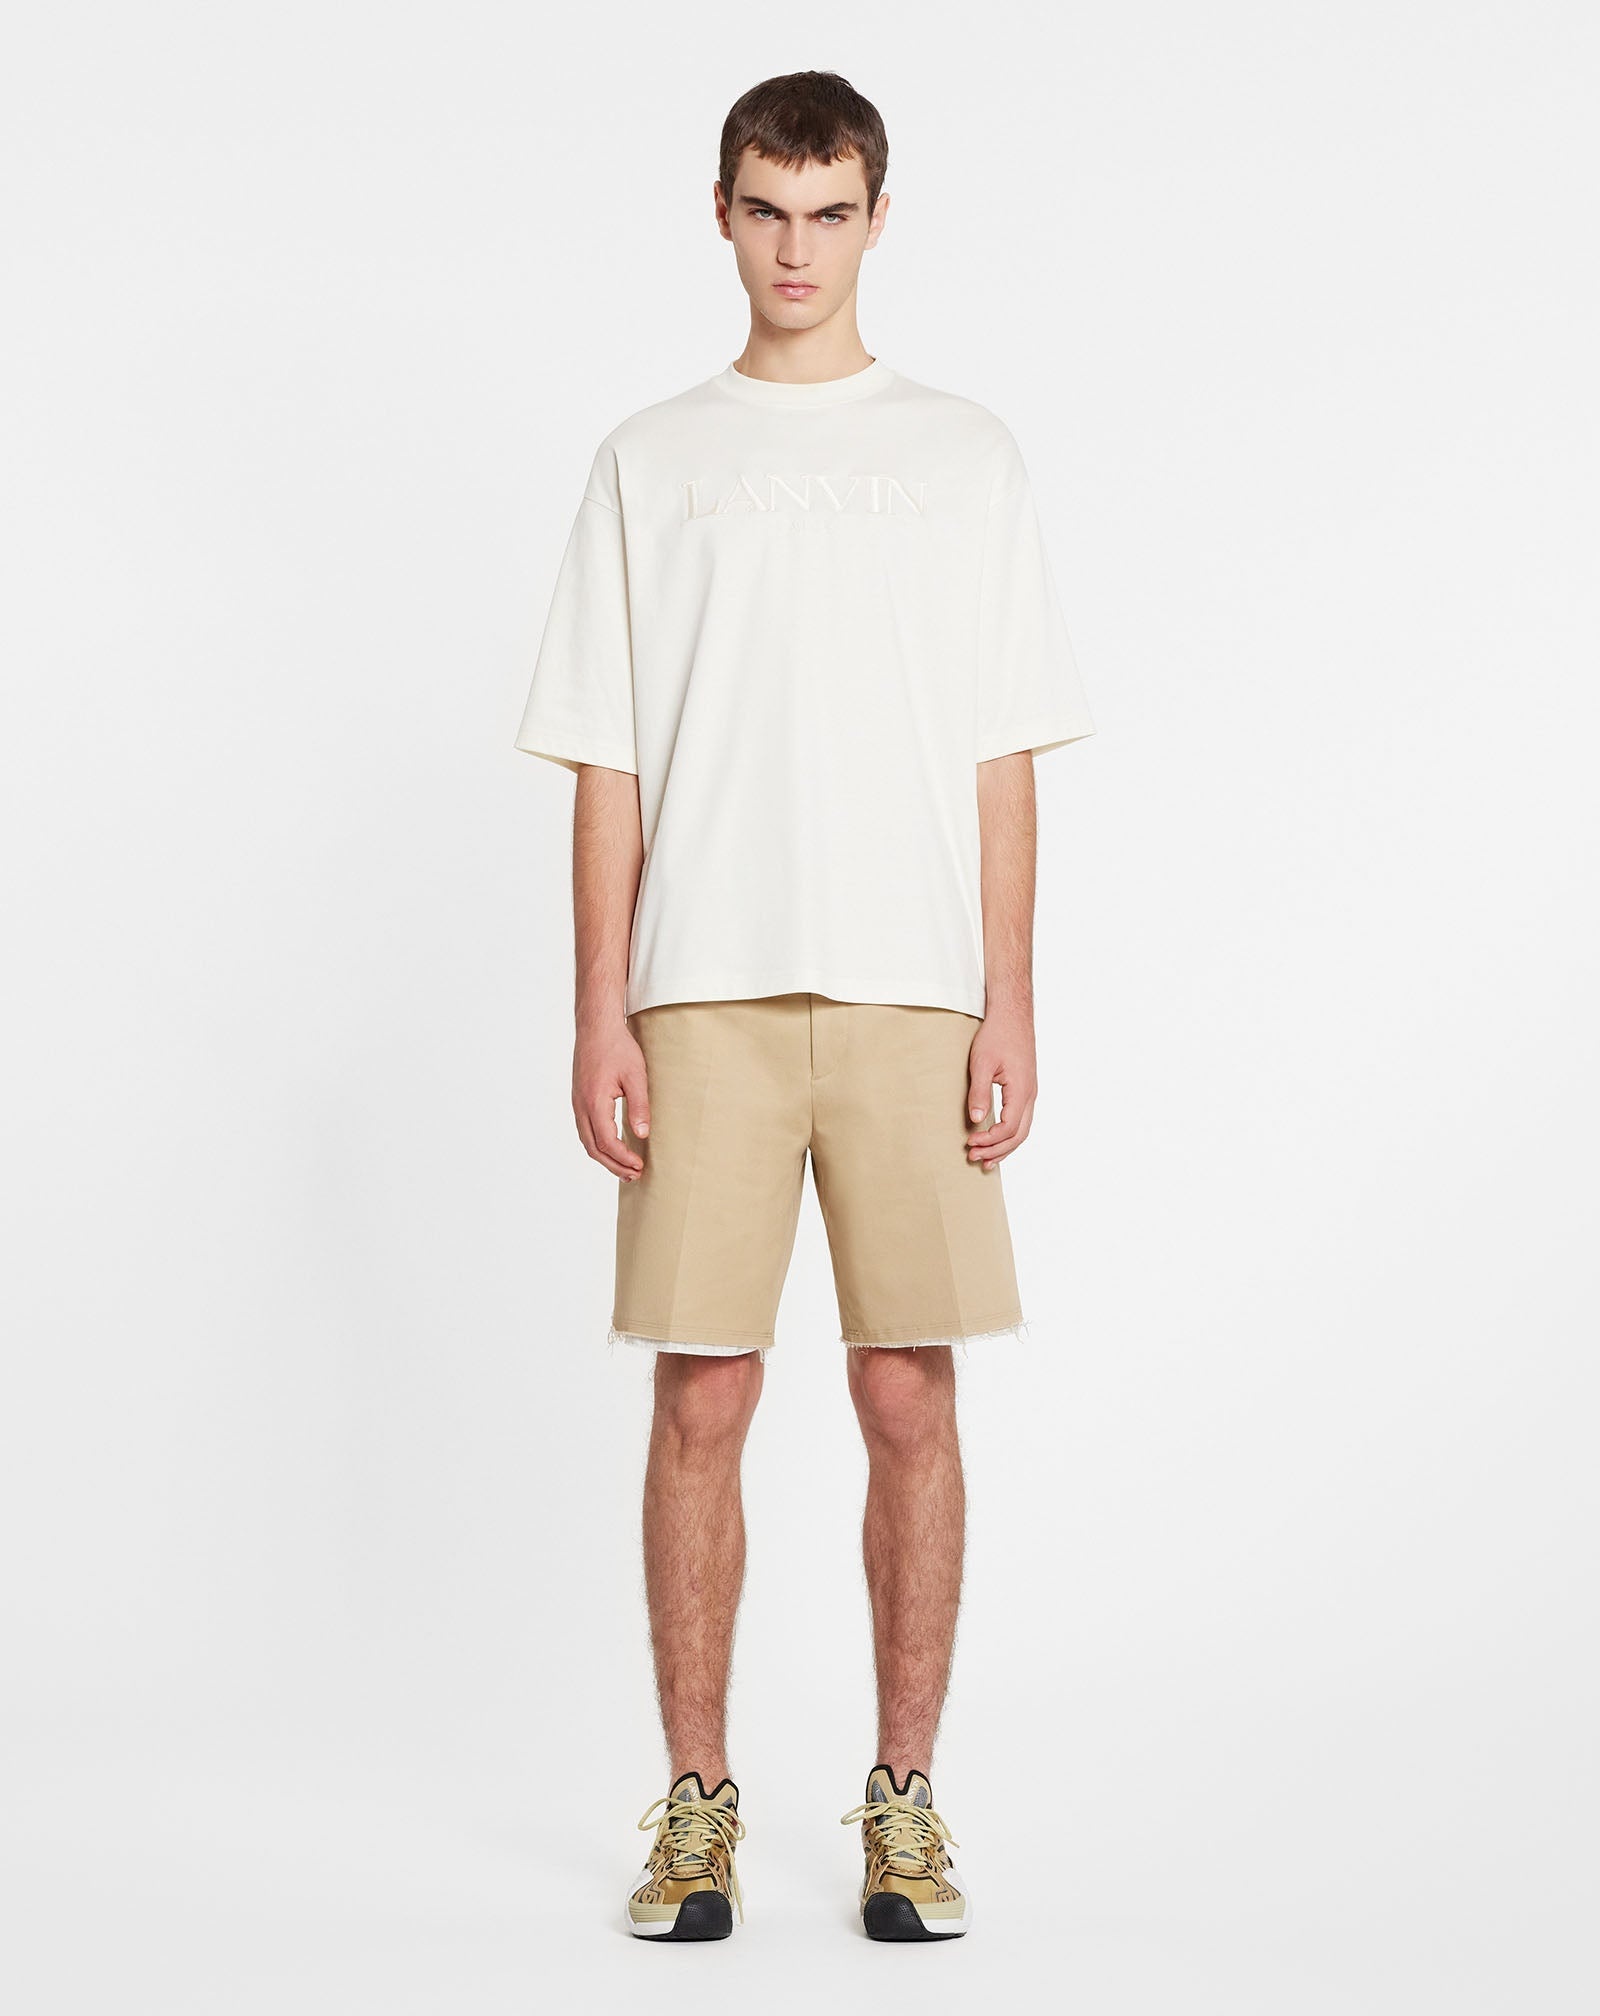 TAILORED SHORTS WITH RAW HEM DETAILS - 2